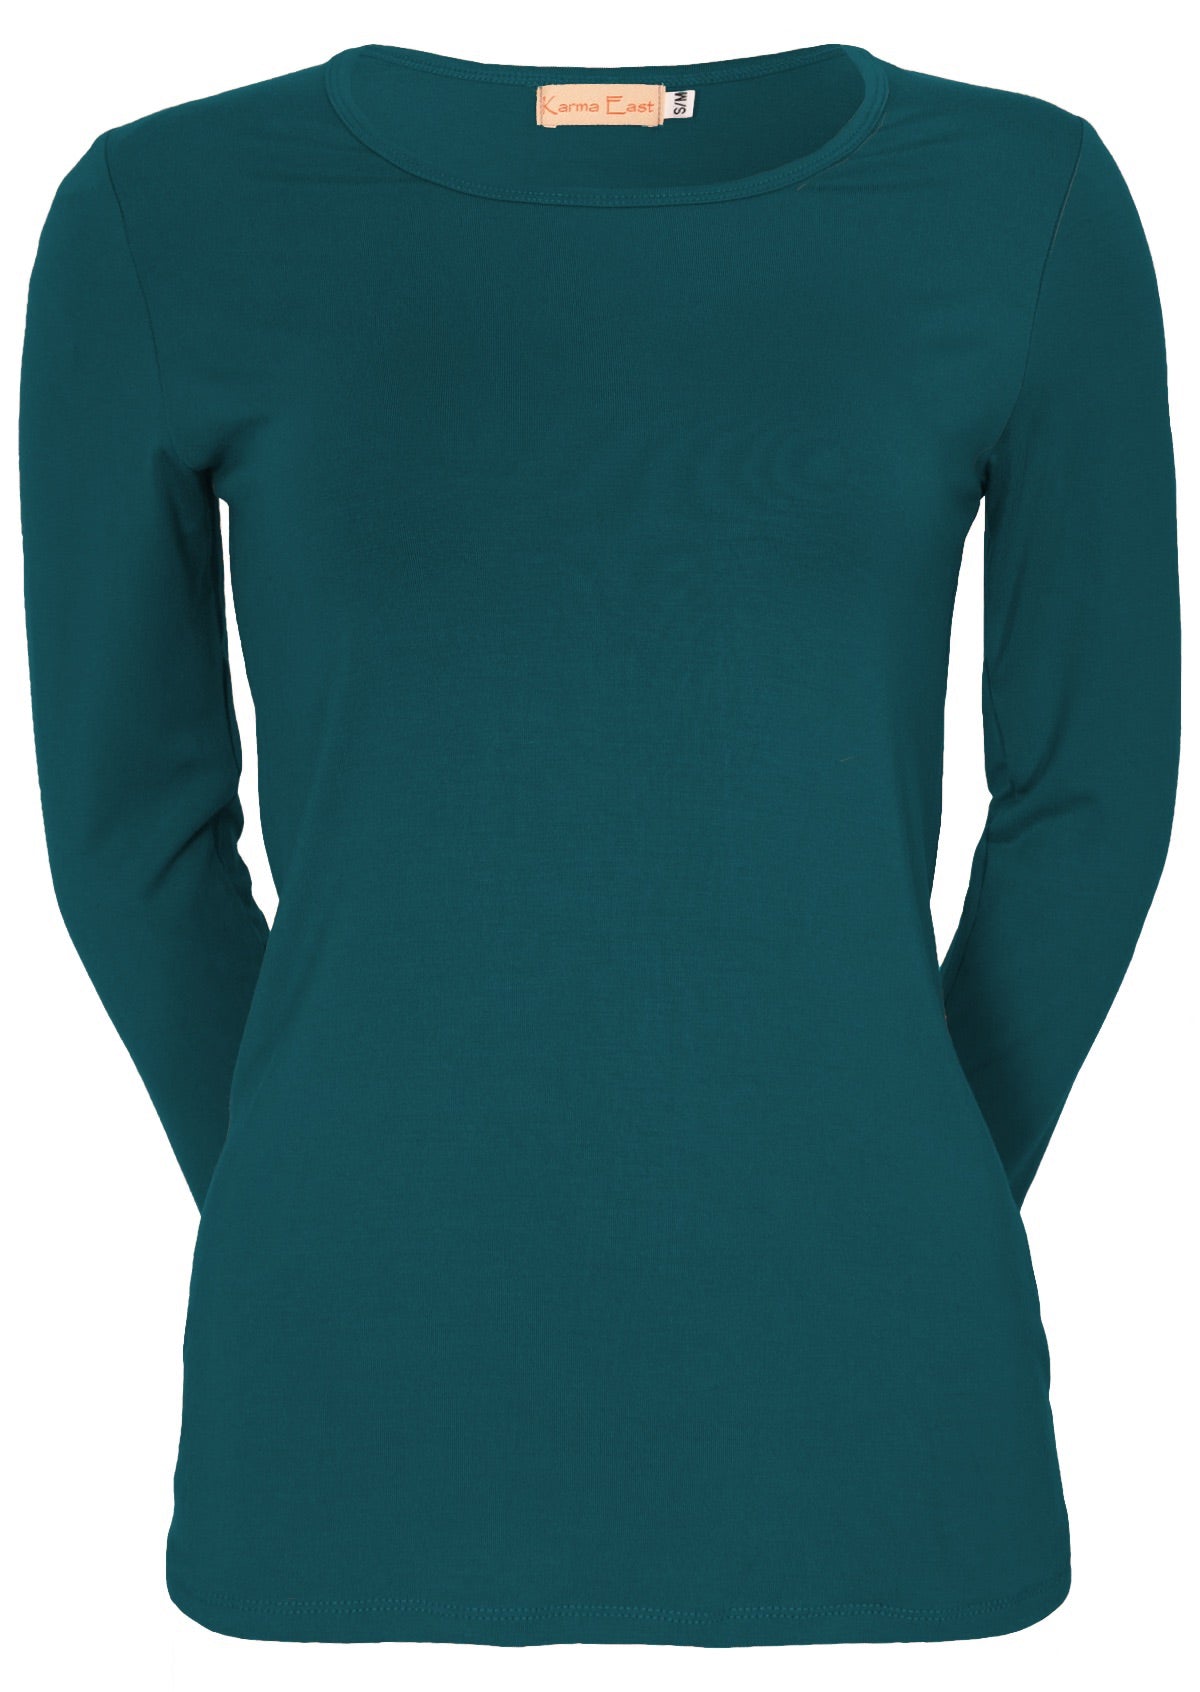 Front view of women's round neck teal long sleeve rayon top.